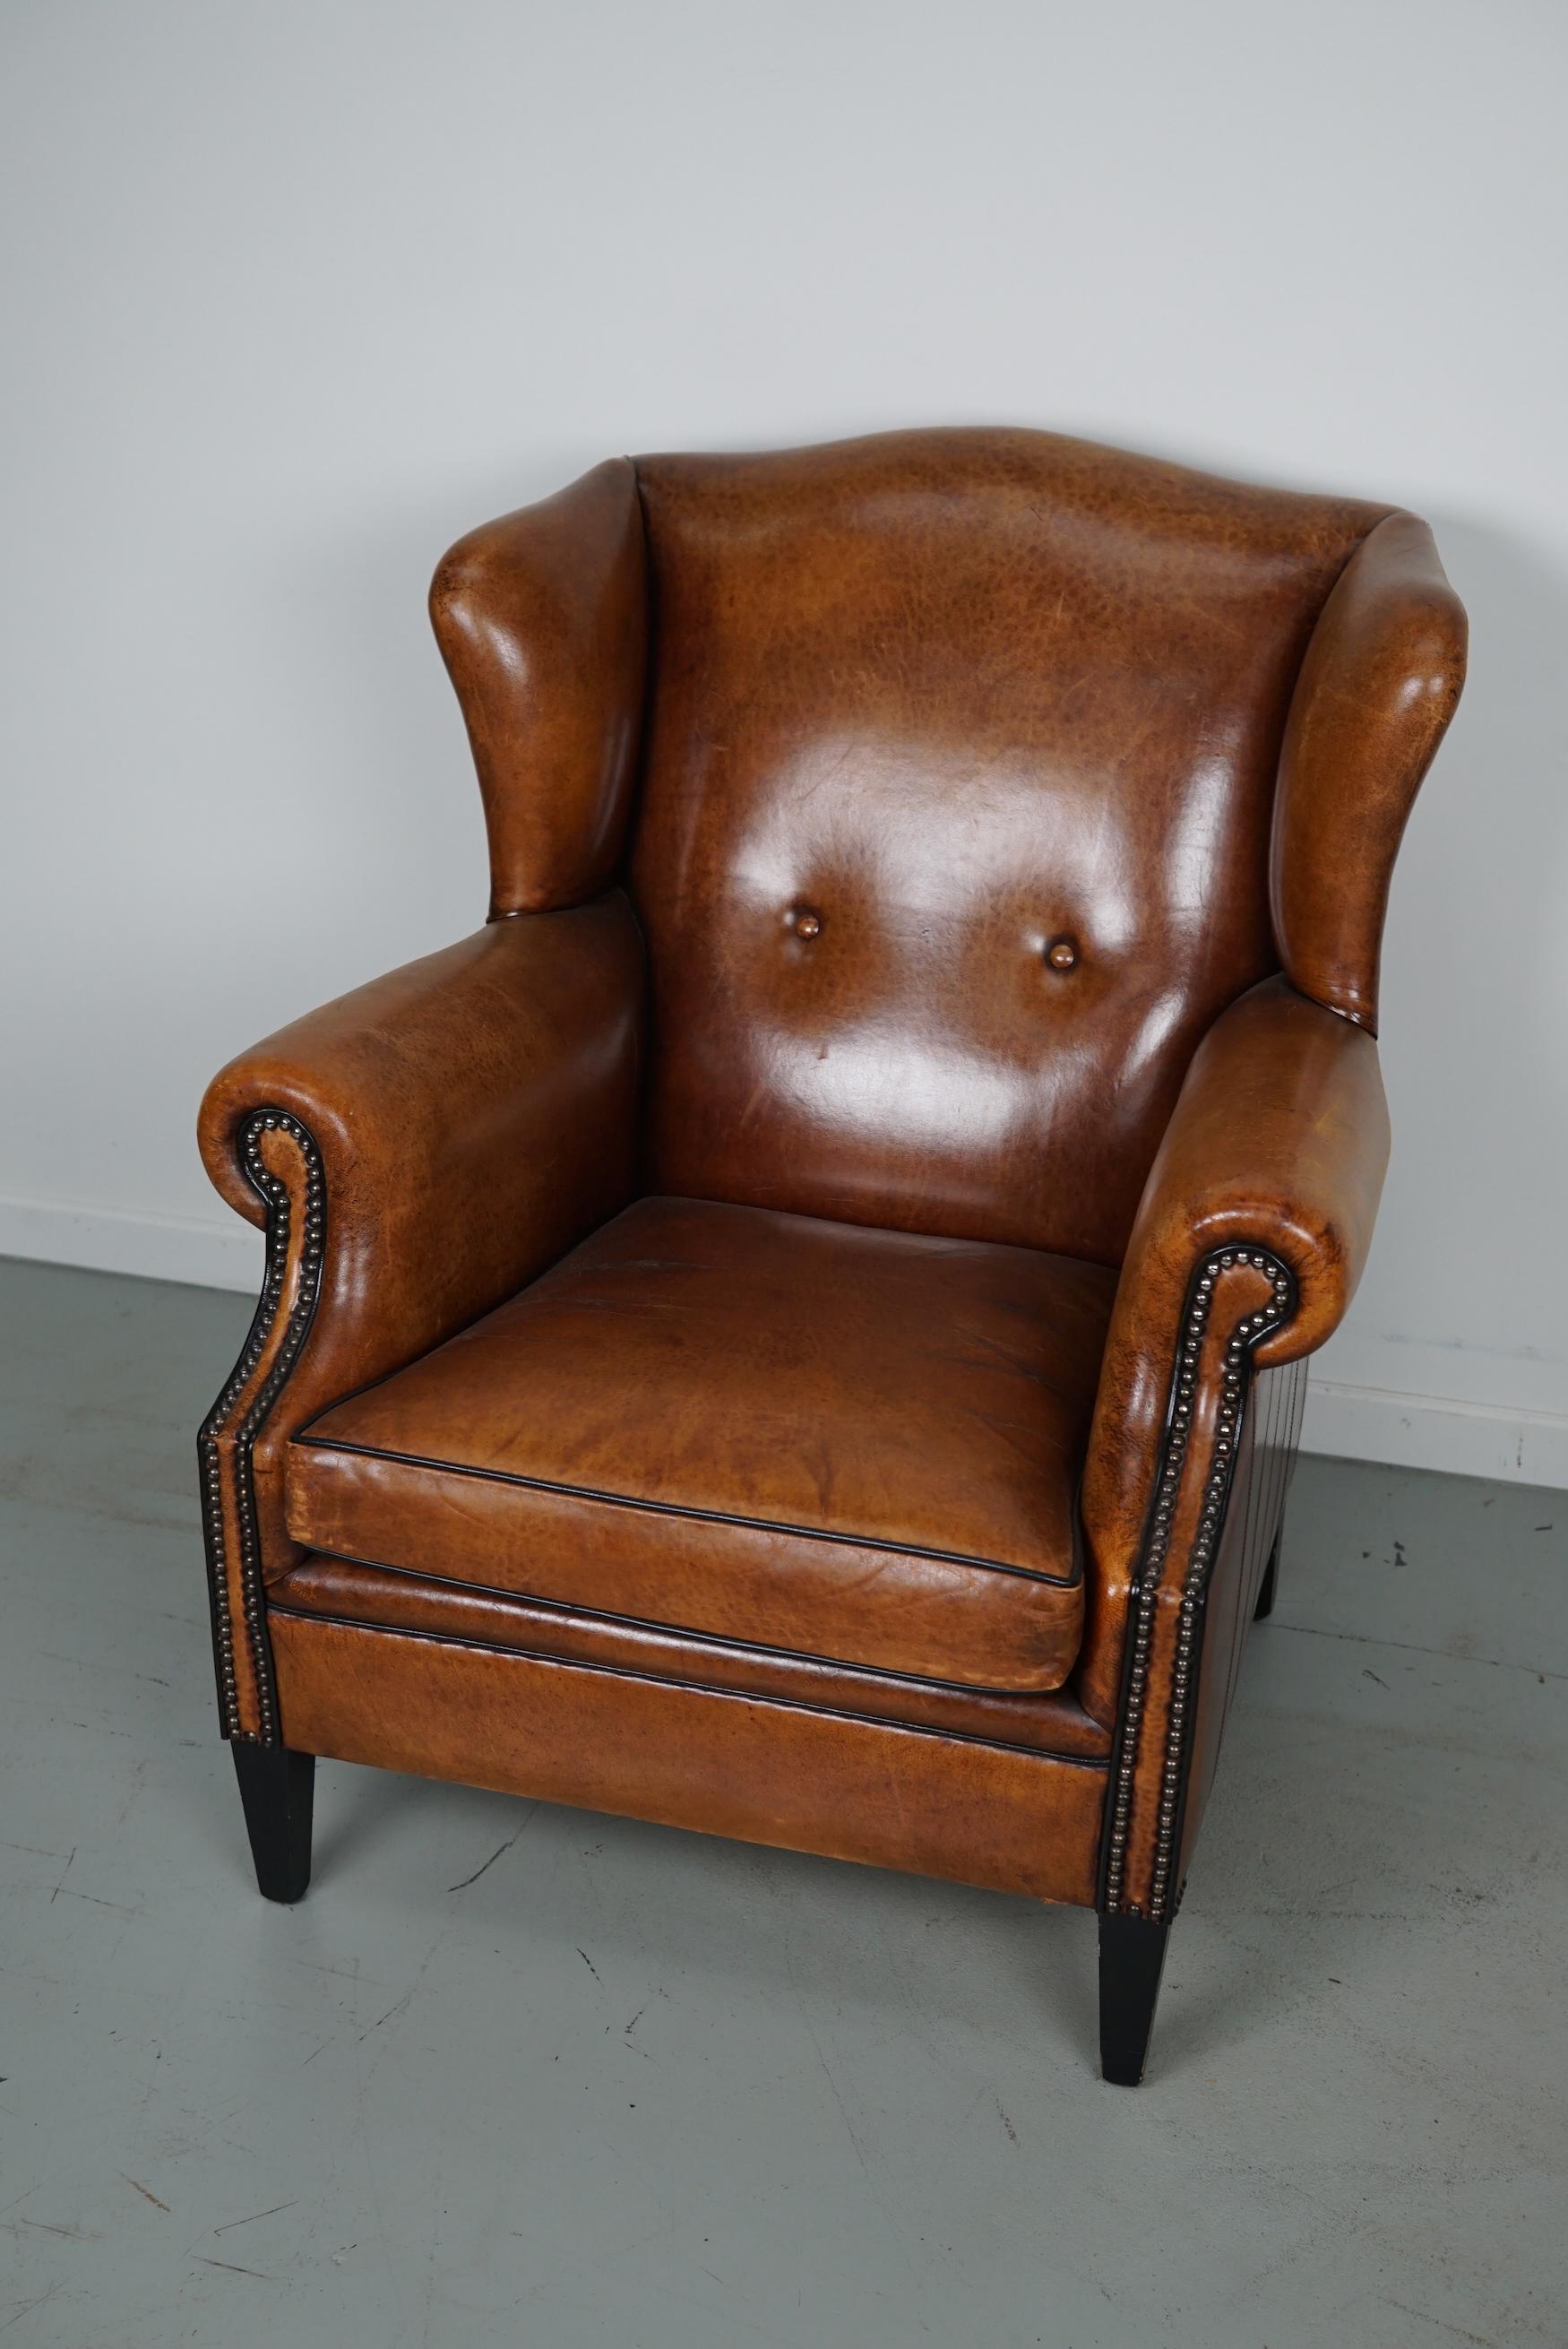 Industrial Vintage Dutch Cognac Colored Wingback Leather Club Chair